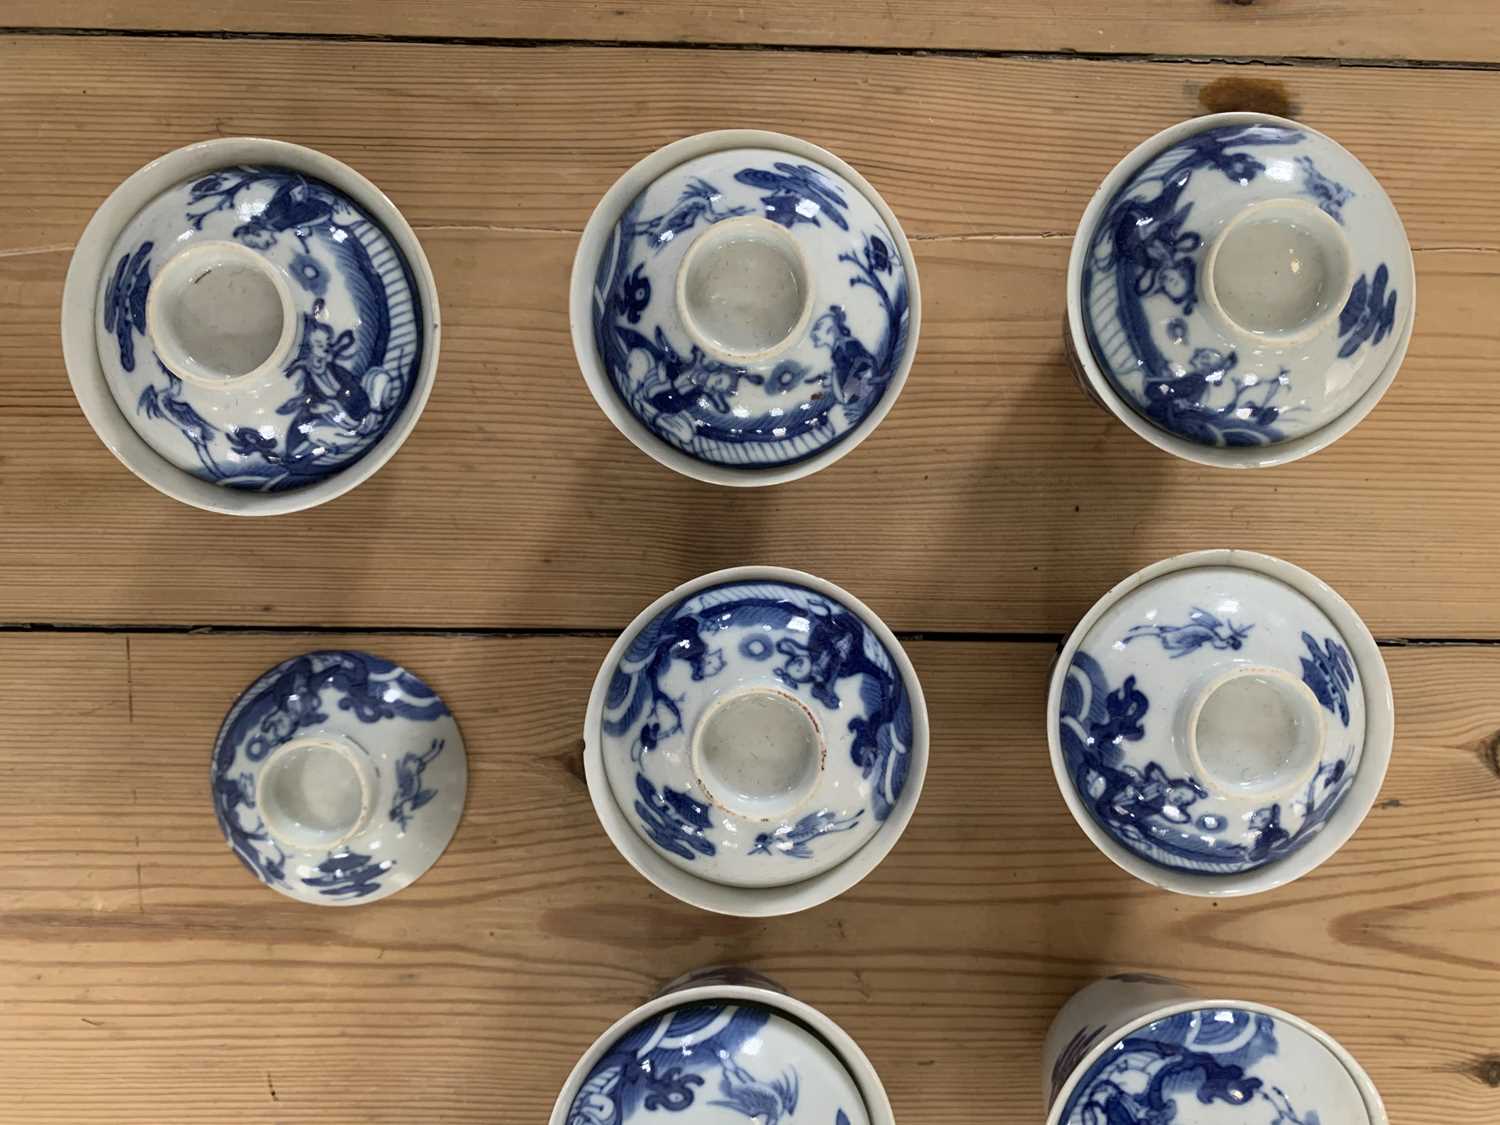 A set of Chinese blue and white porcelain cups, covers and stands, 18th century. - Image 16 of 41